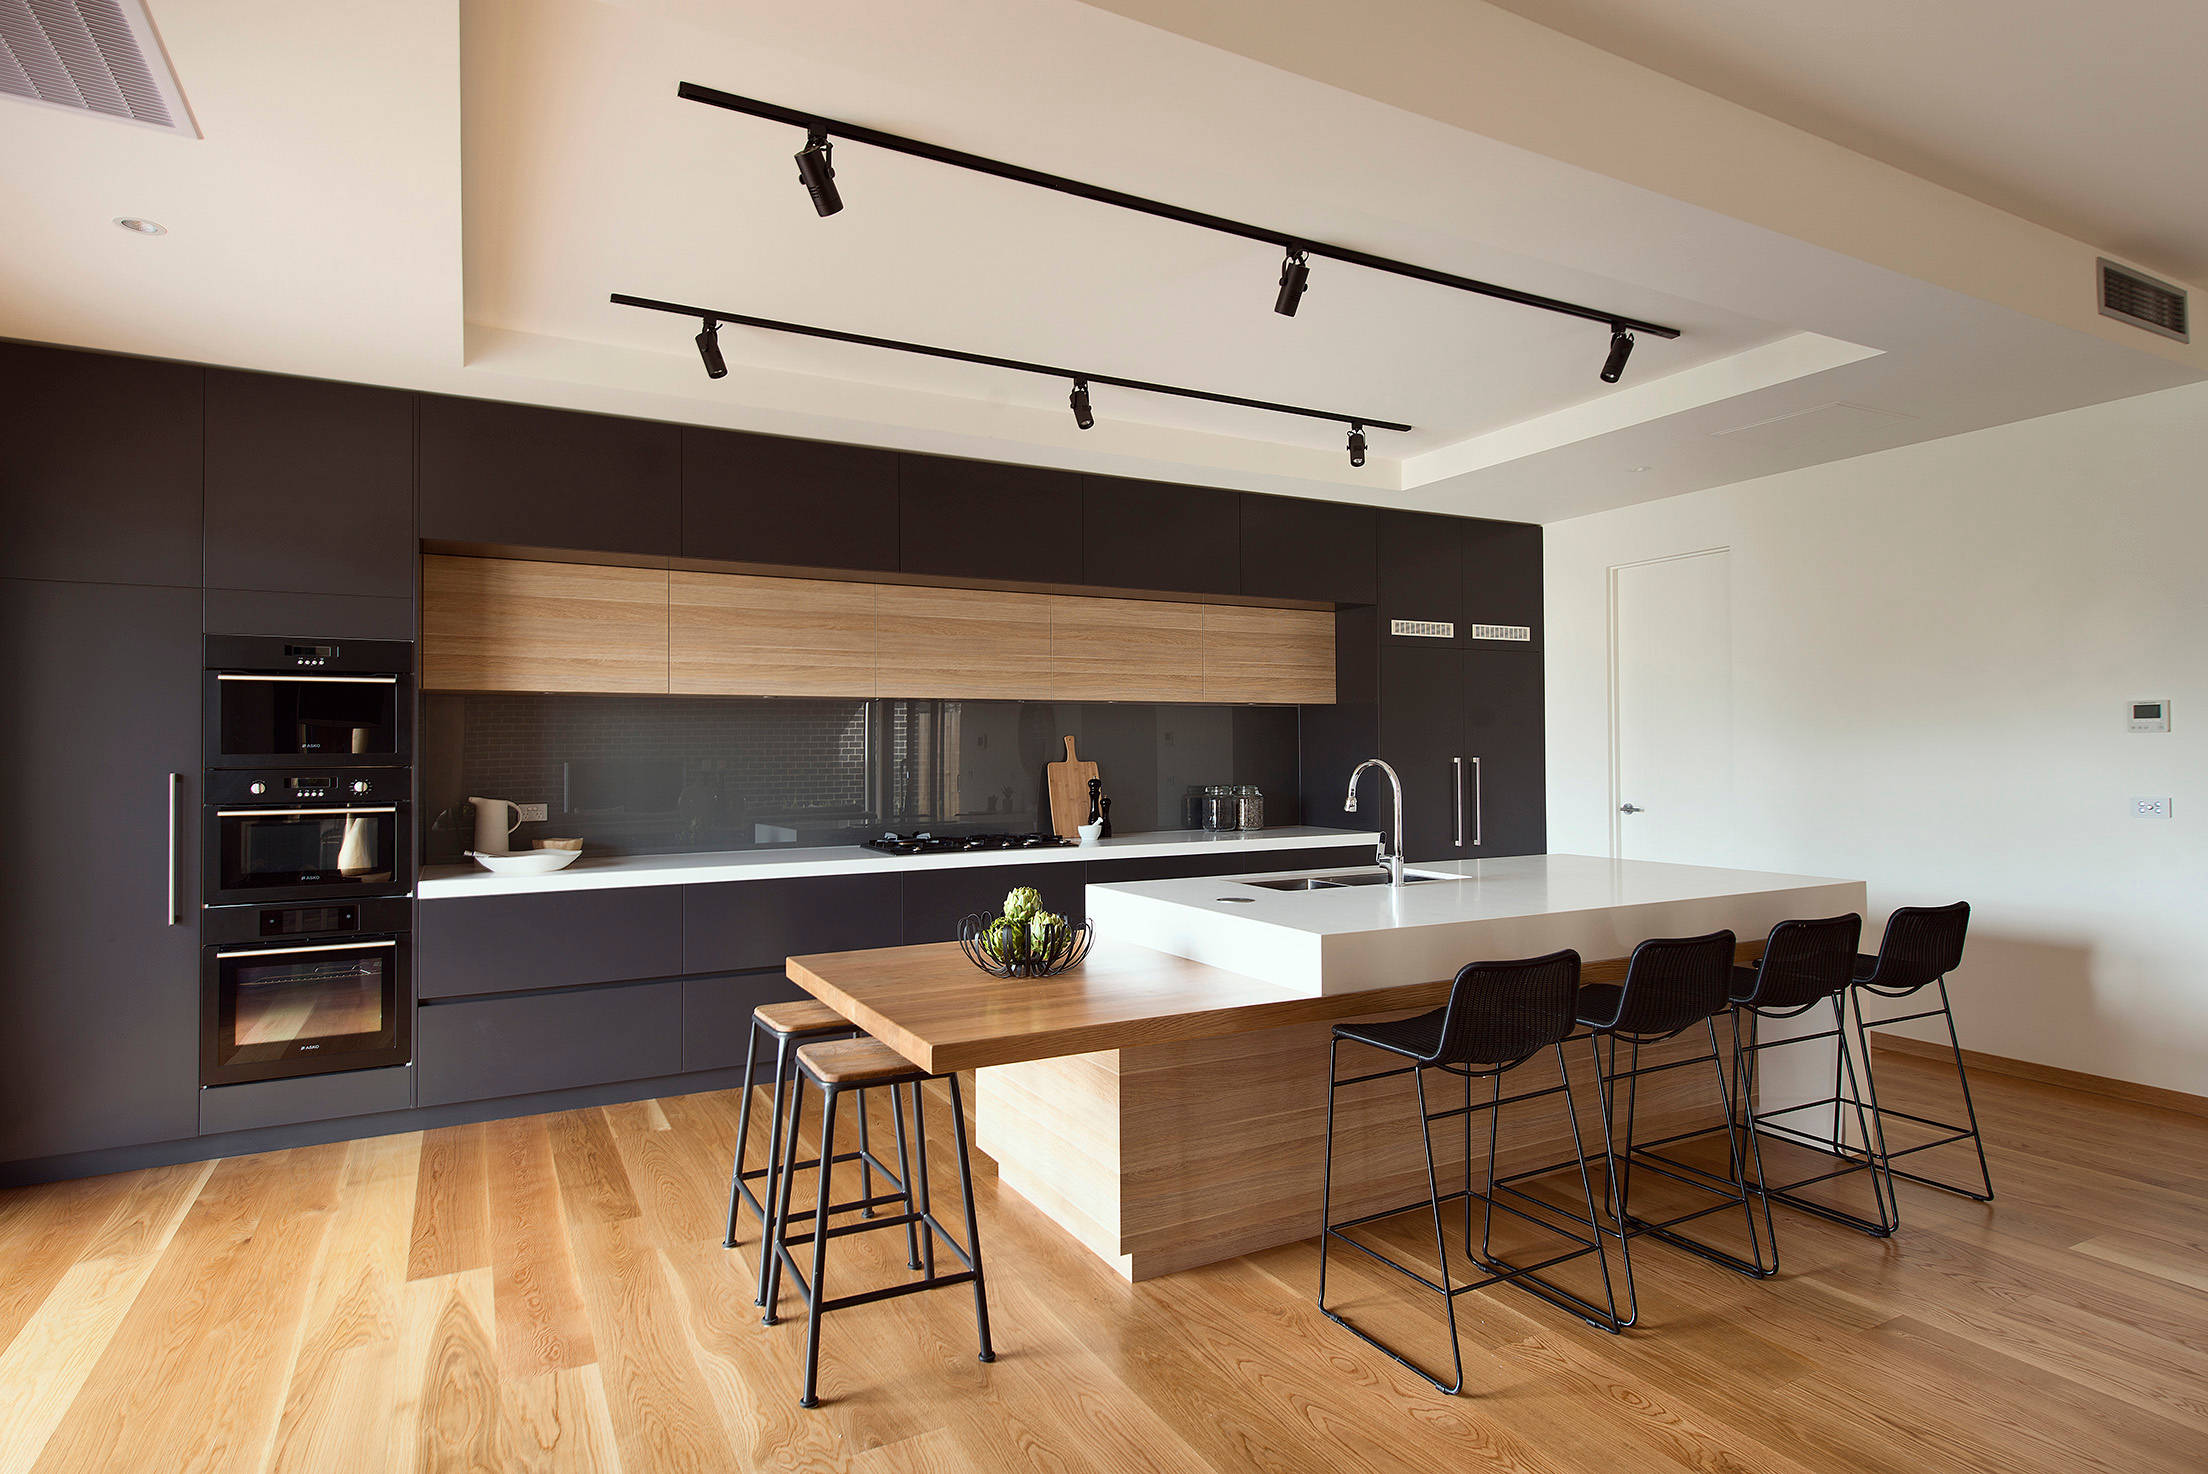 modern large kitchen island with table at end